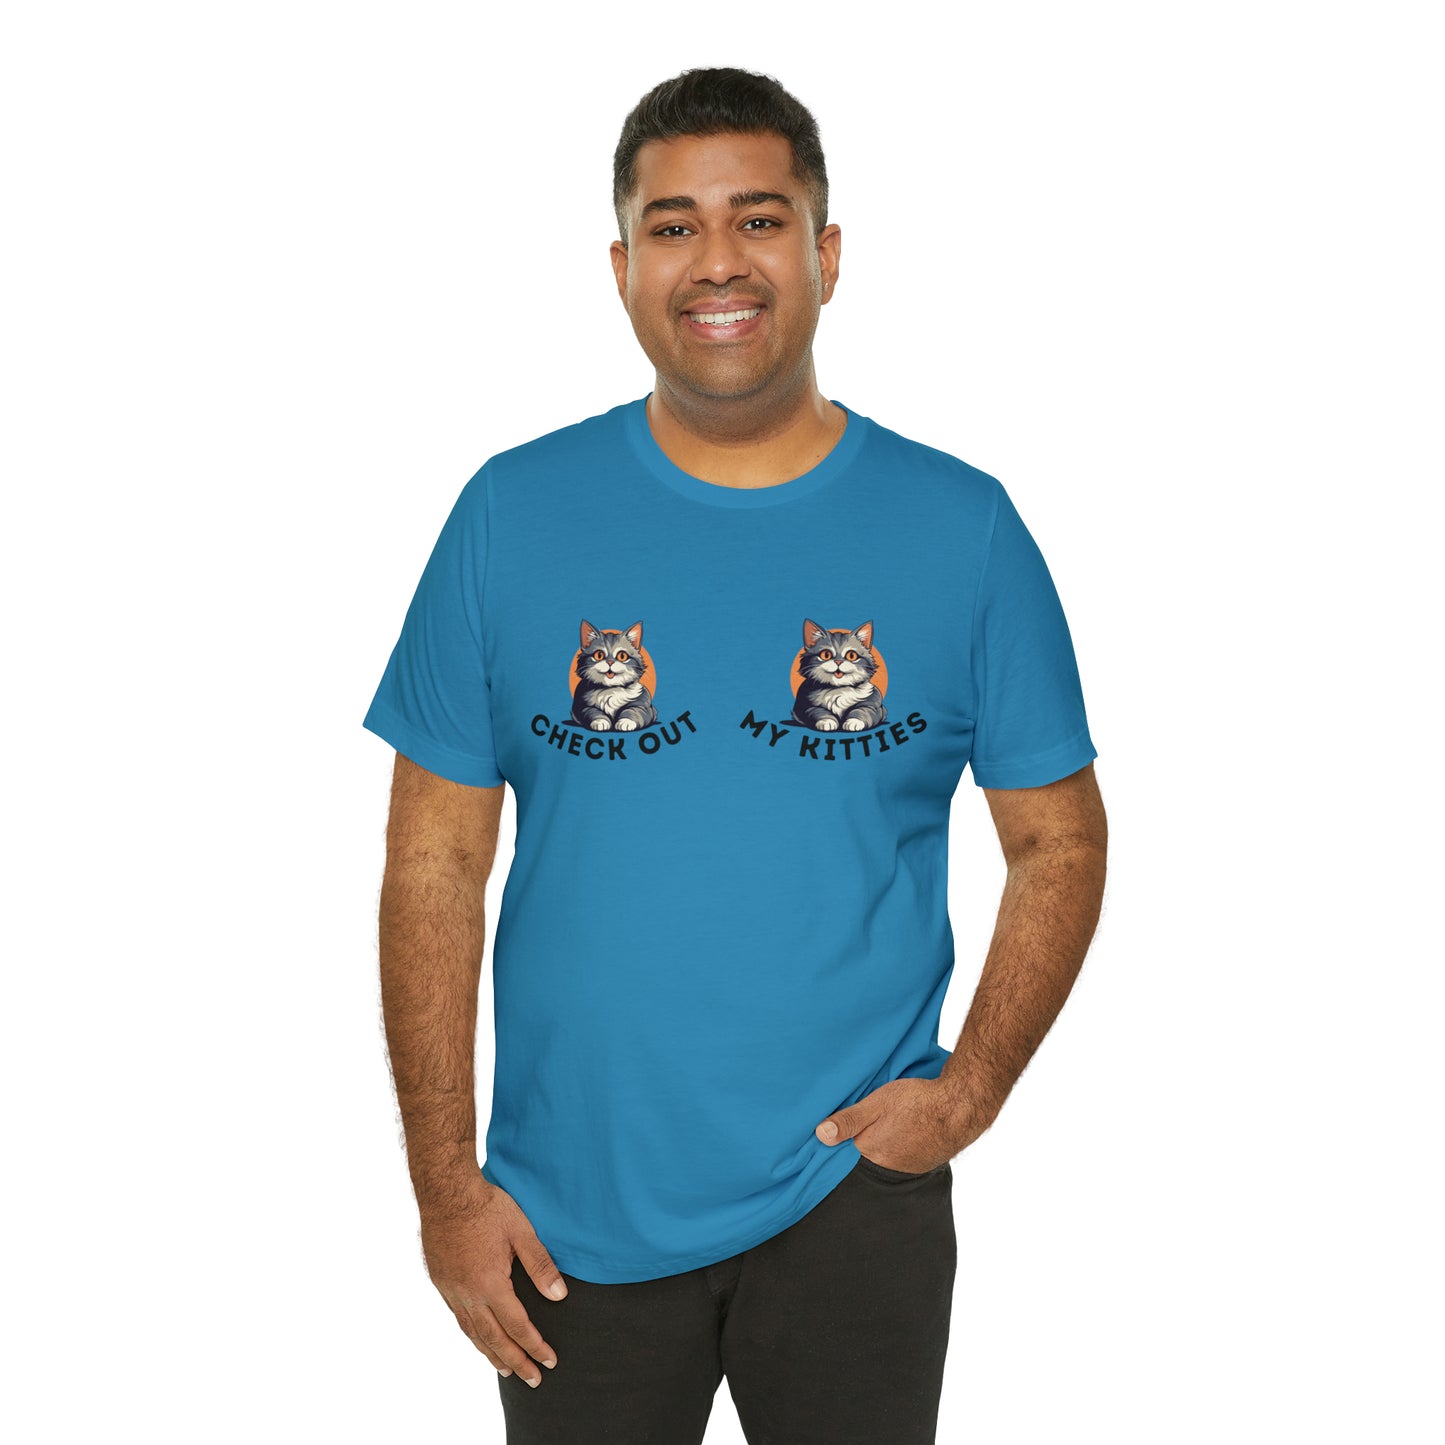 Kitty Cat T-Shirt / Check Out My Kitties Shirt / Unisex Jersey Short Sleeve Tee / Humorous Pet Clothes